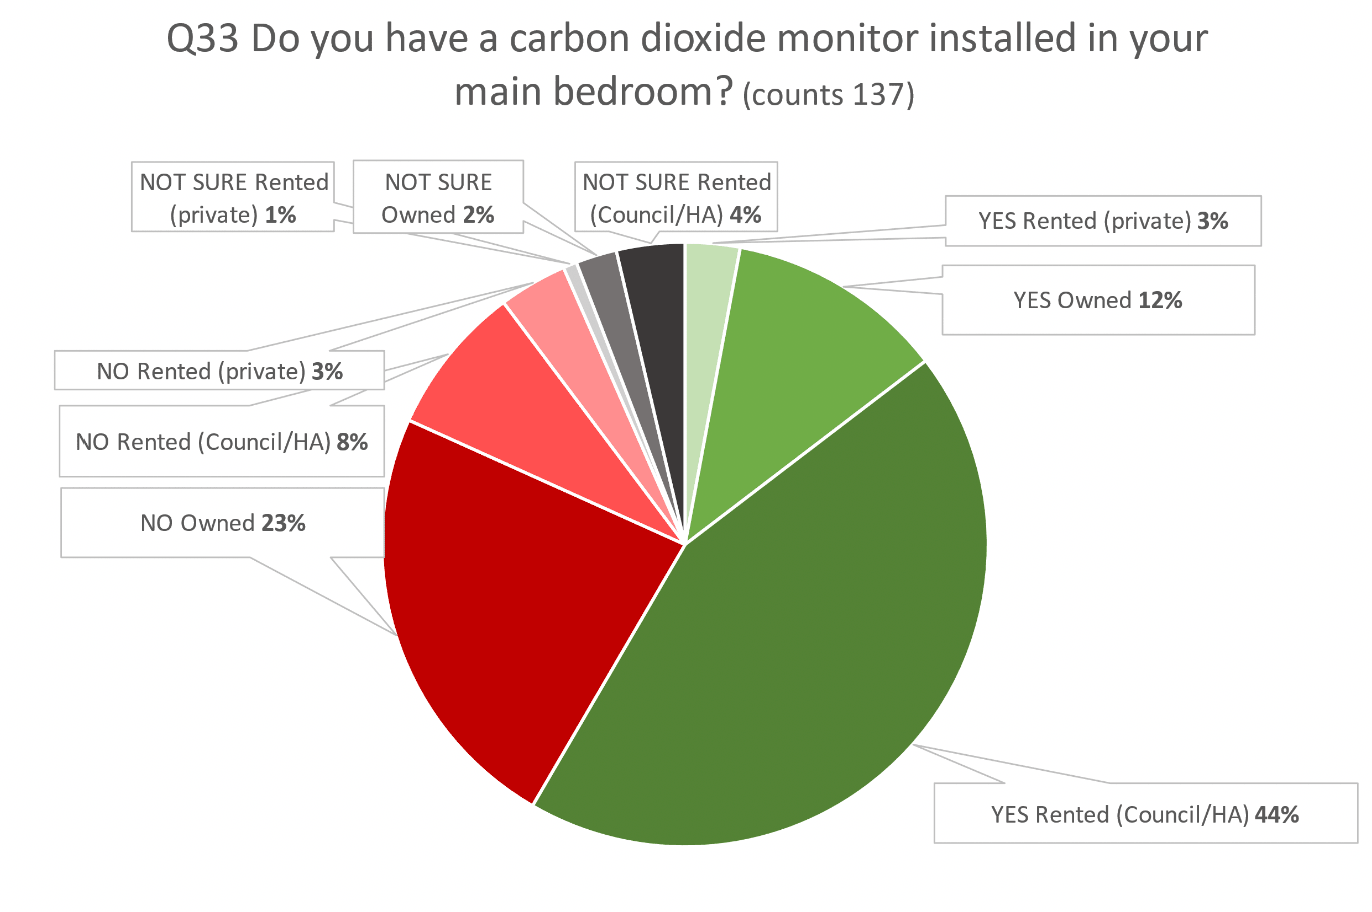 A pie chart indicating results asking occupants if they have a carbon dioxide monitor installed in their main bedroom.